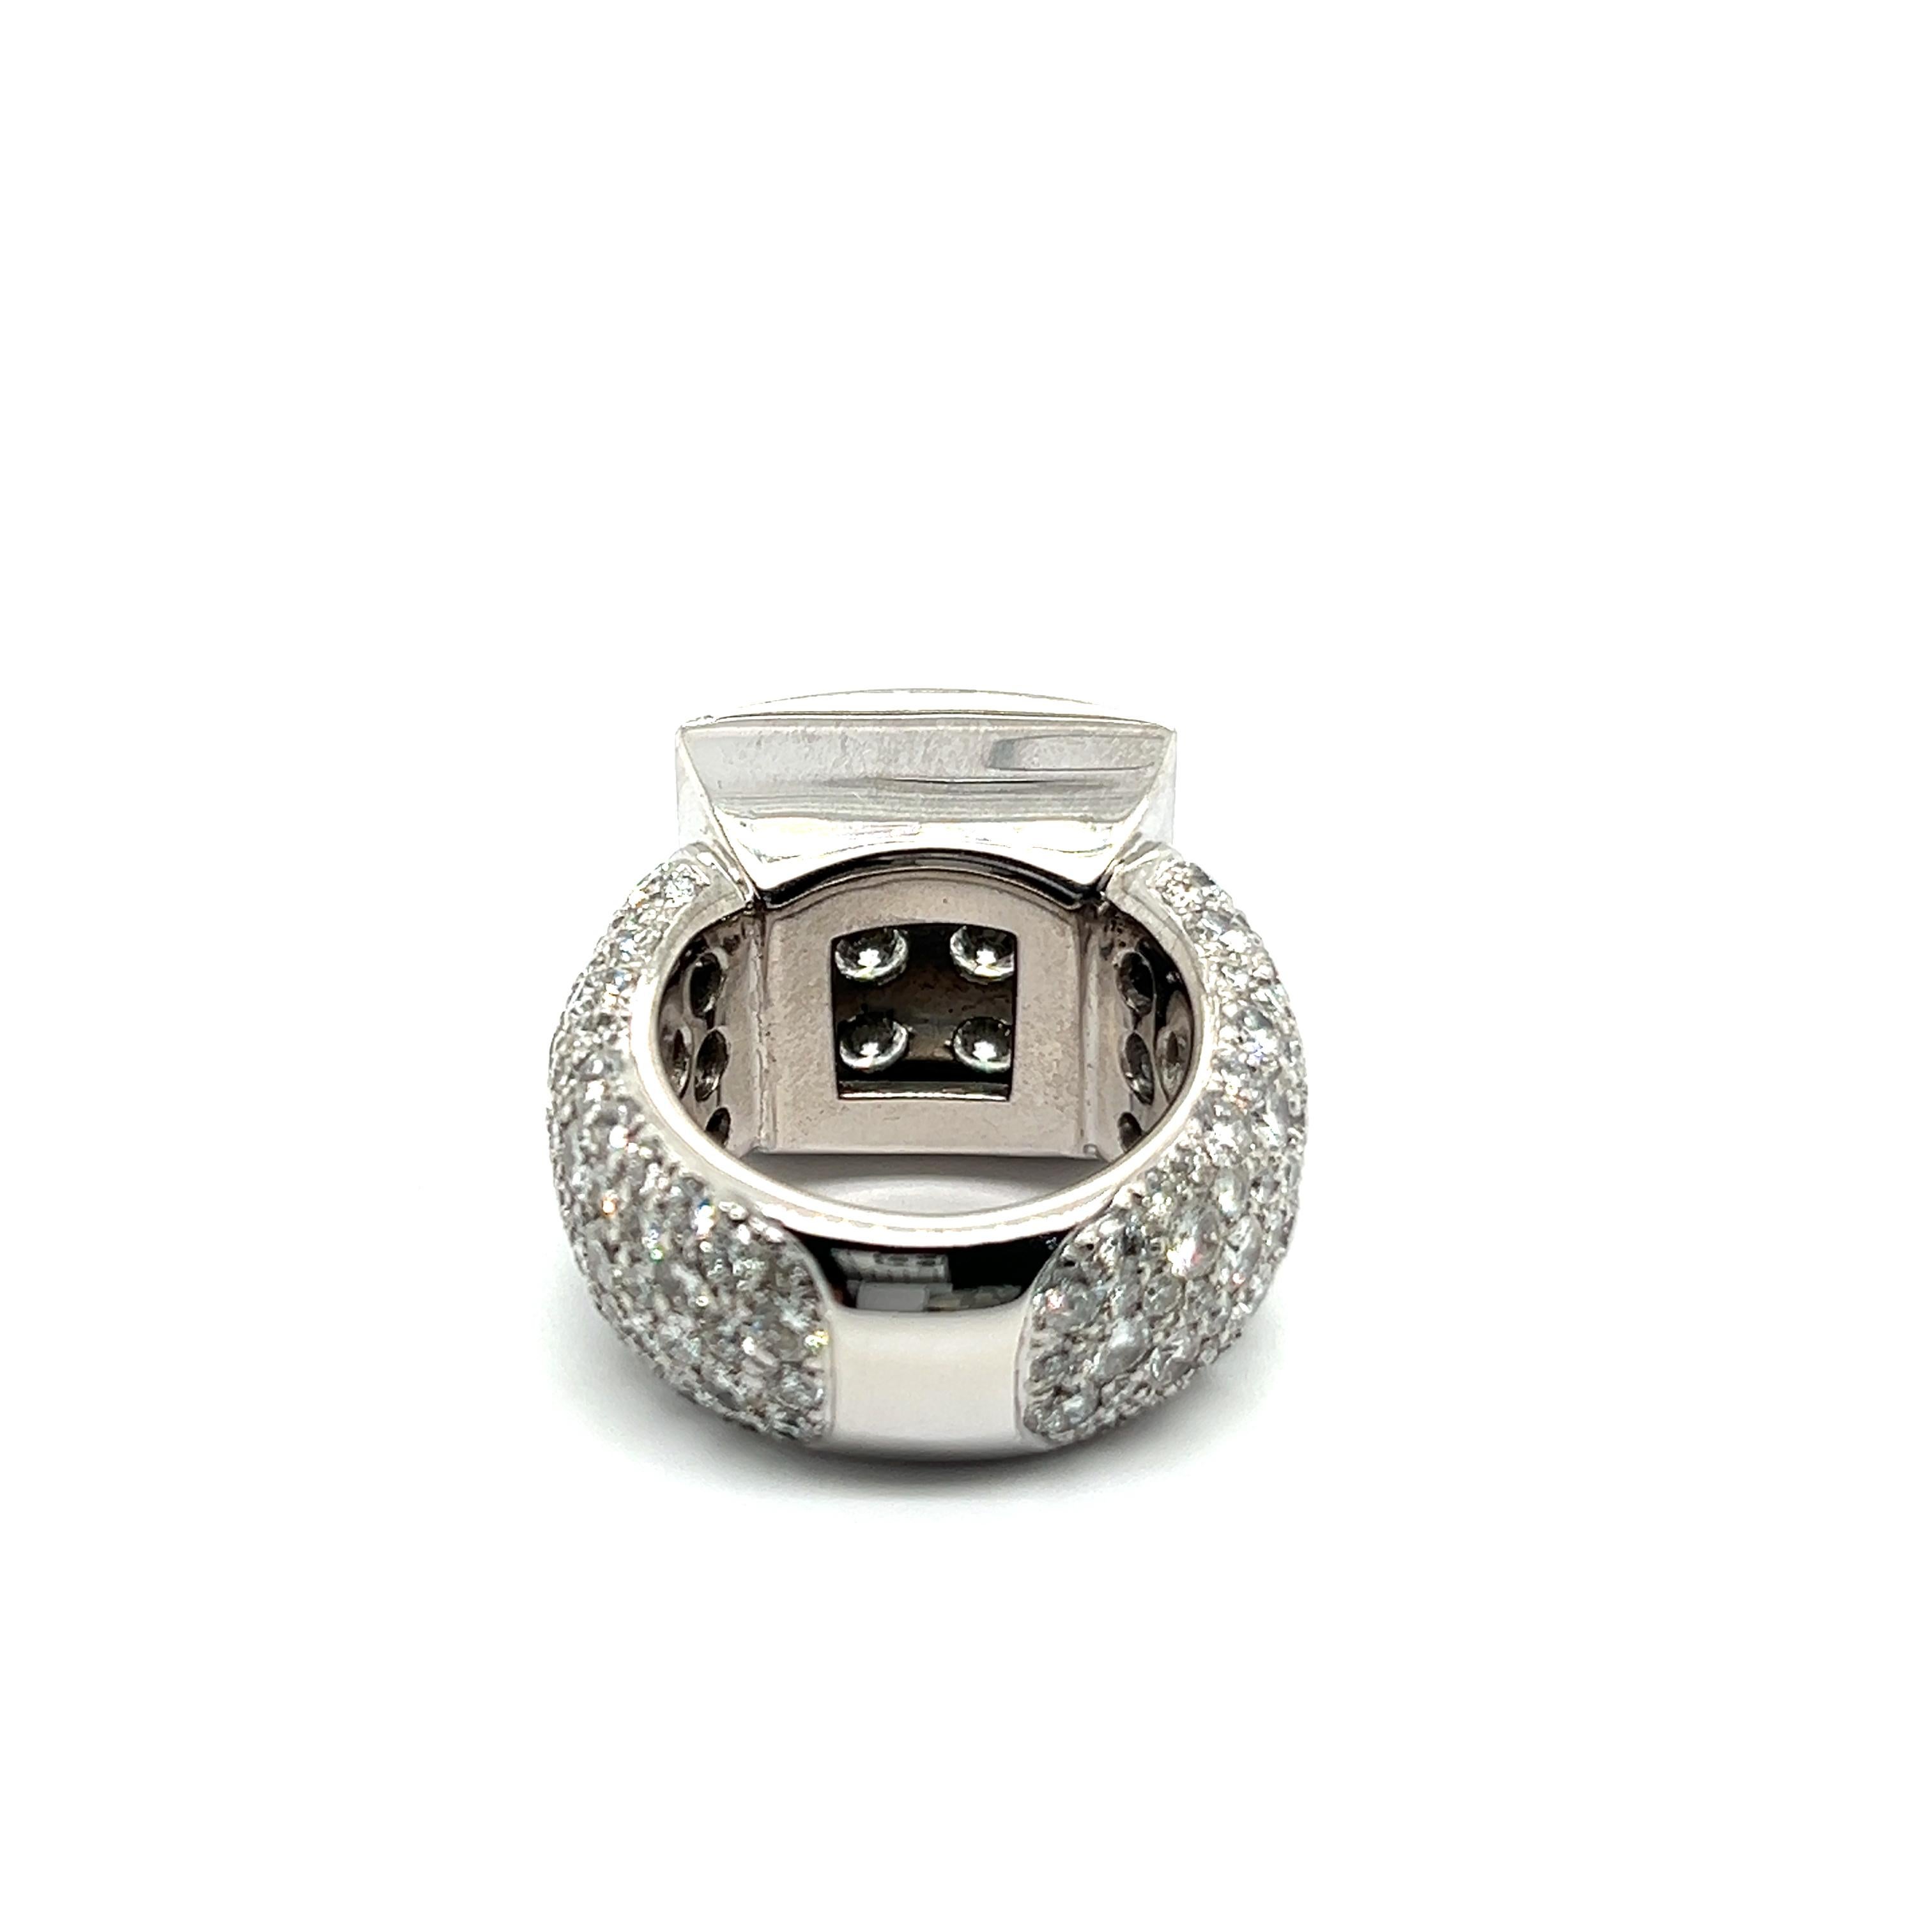 Brilliant Cut Bold Graphic Ring with Diamonds in 18 Karat White Gold by Majo Fruithof For Sale